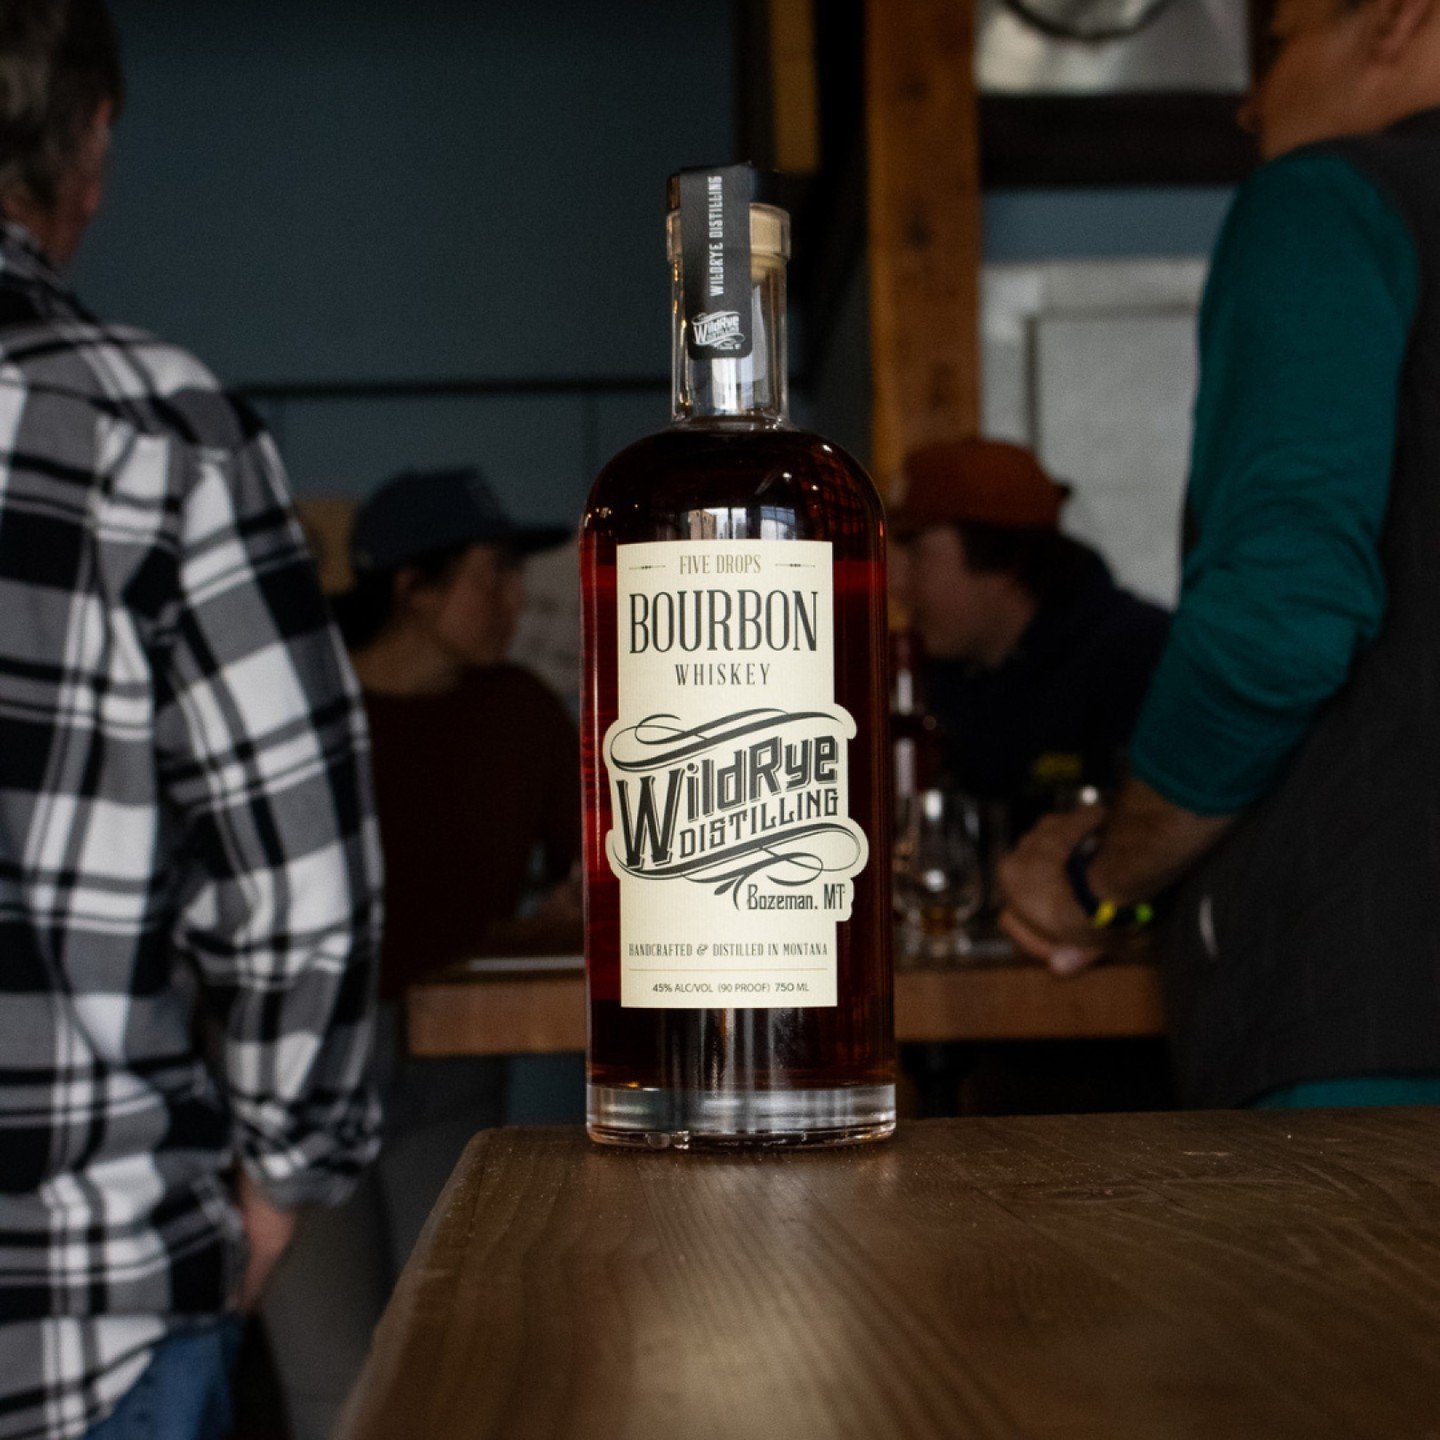 As part of our regular annual spring training, our staff took a tour of Wildrye Distilling recently to learn all about their distilling process, what they stand for, and what makes their products so unique.

You can find a number of their spirits on 